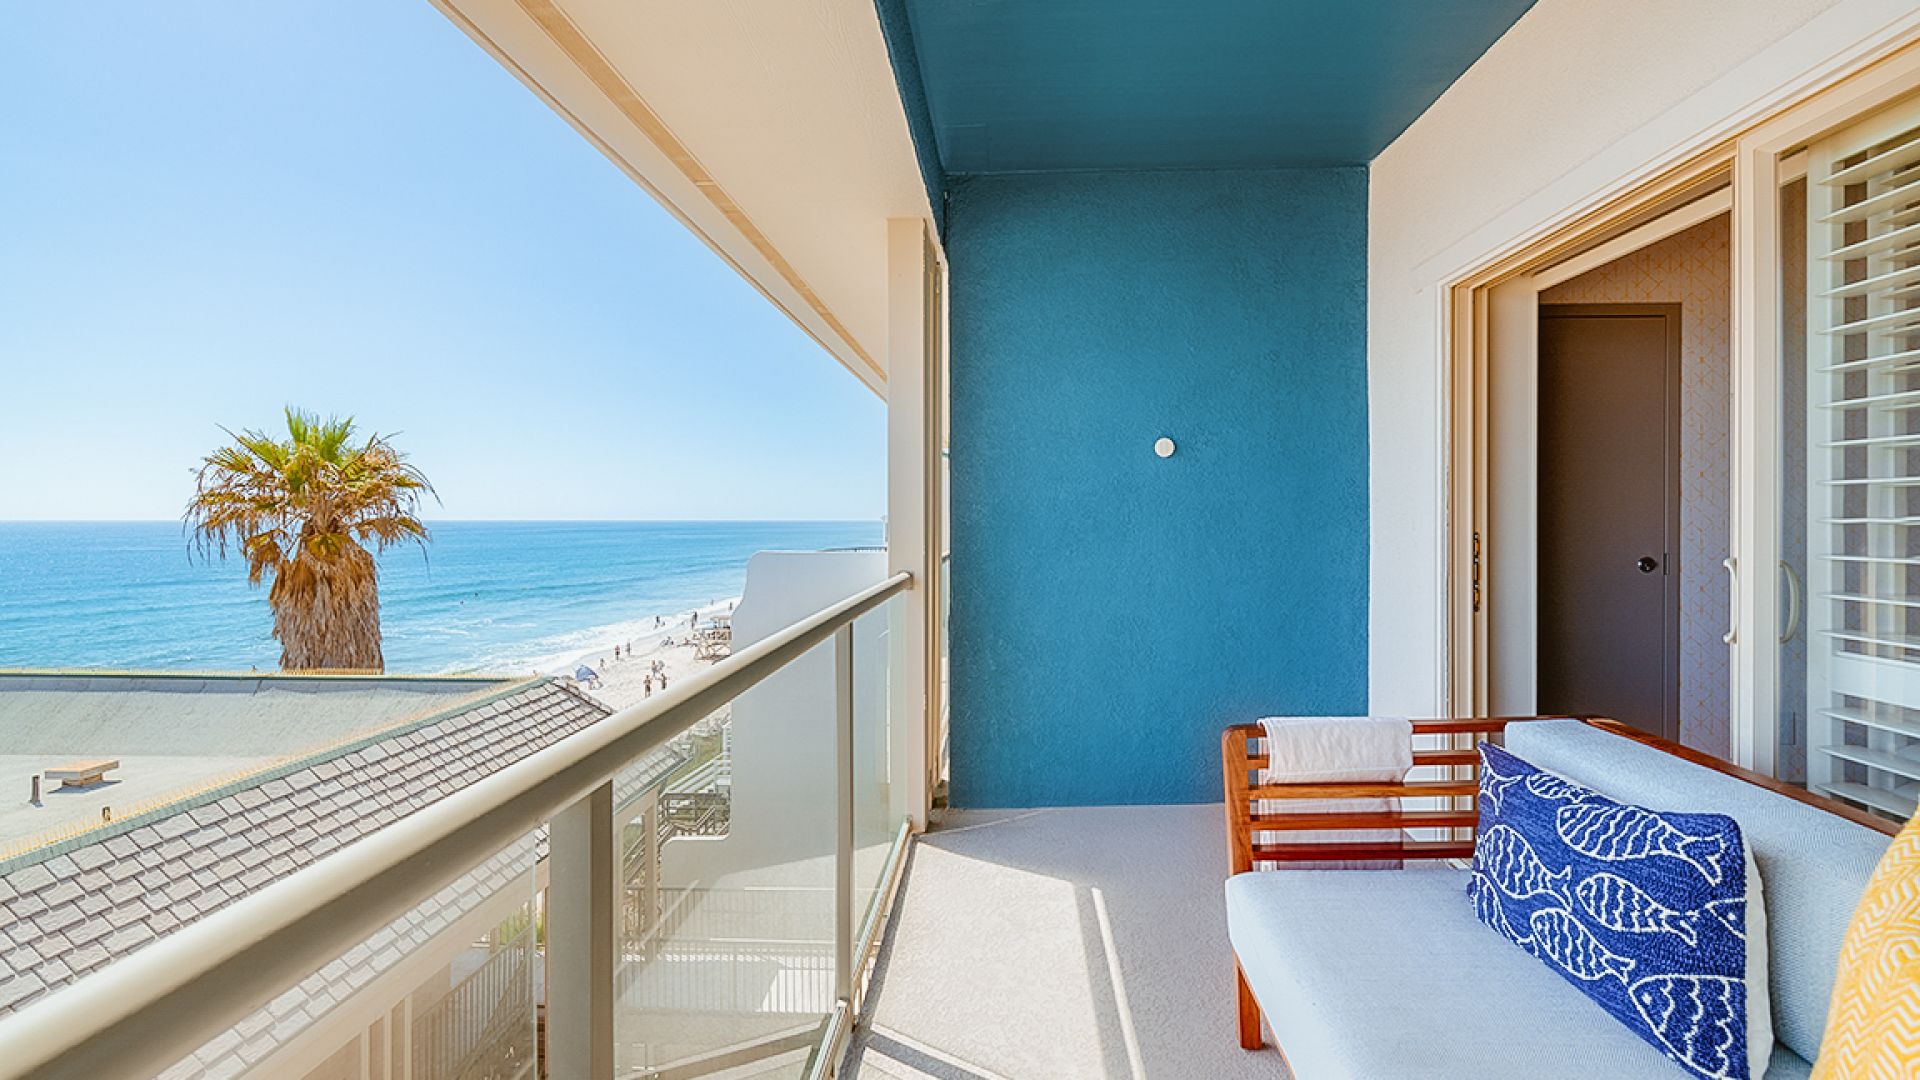 A Balcony With A View Of The Ocean And A Beach